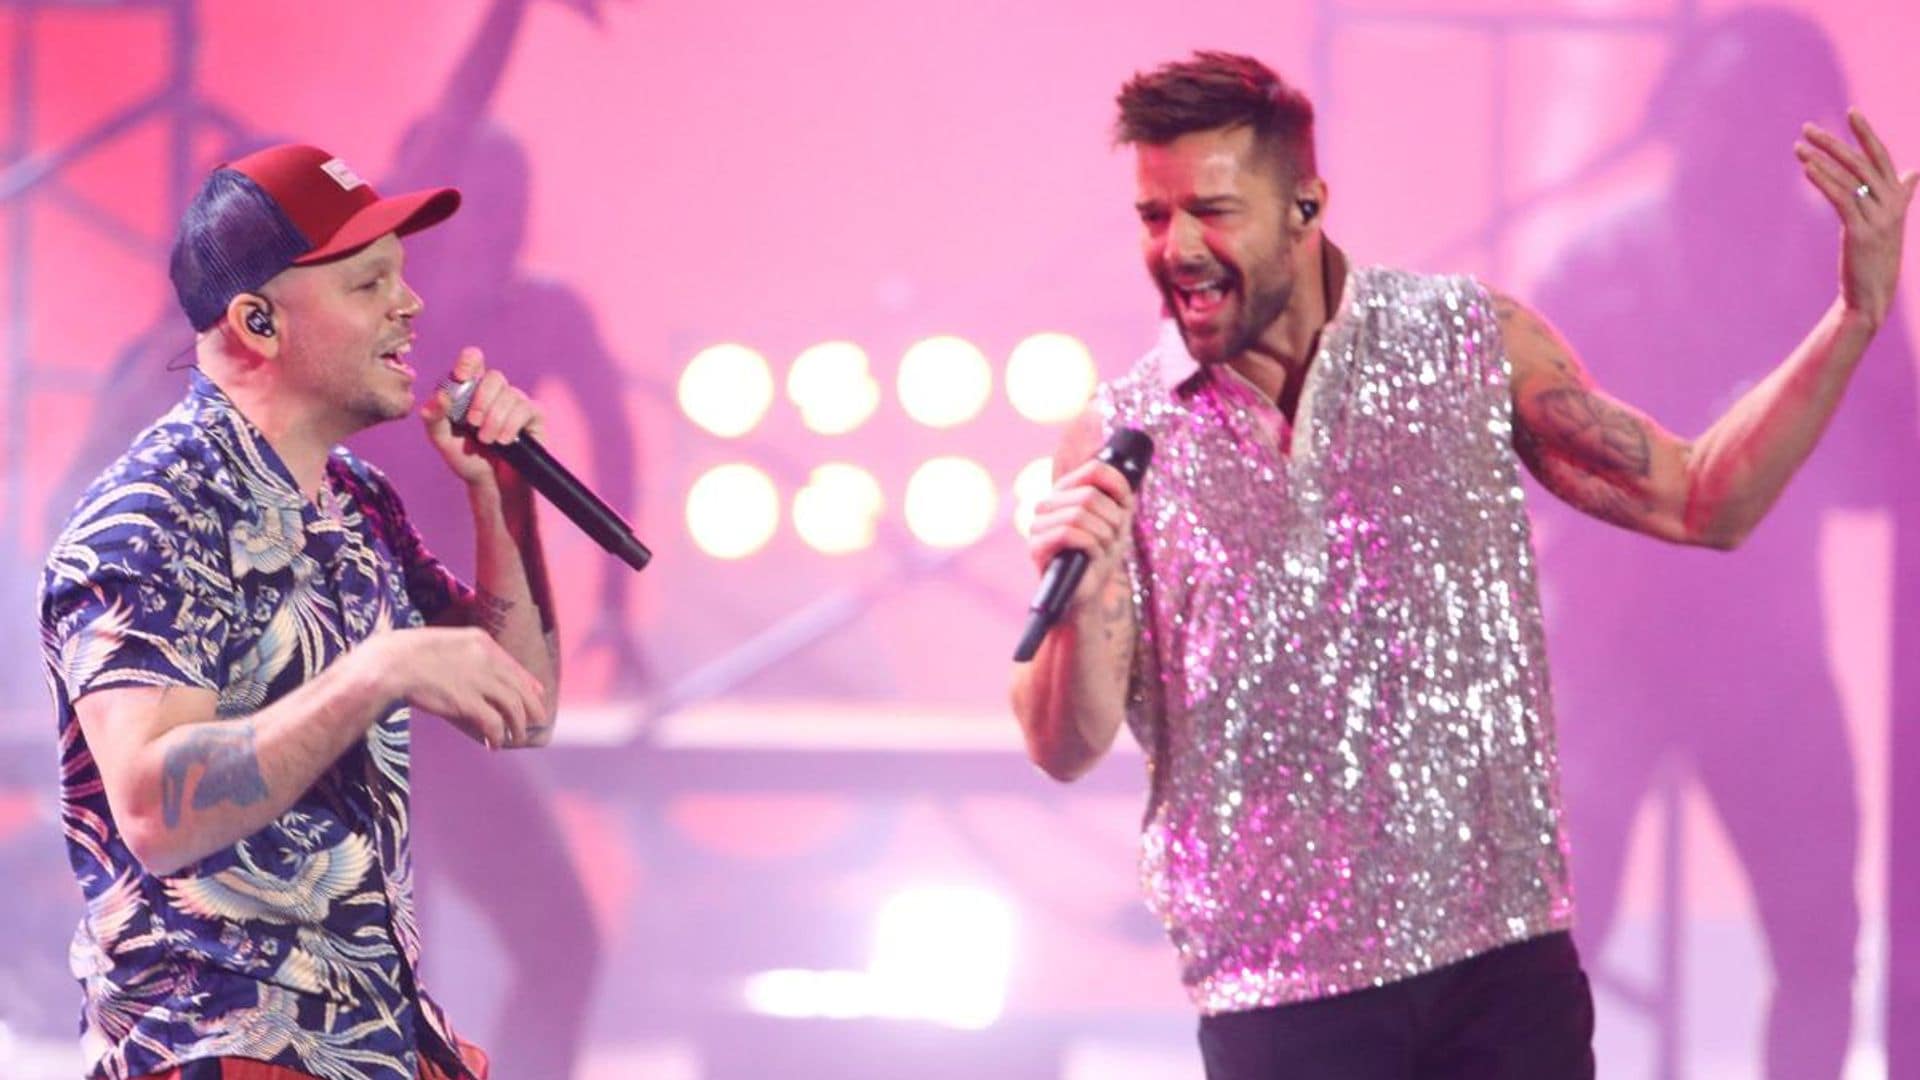 Ricky Martin joins Residente for incendiary new music video